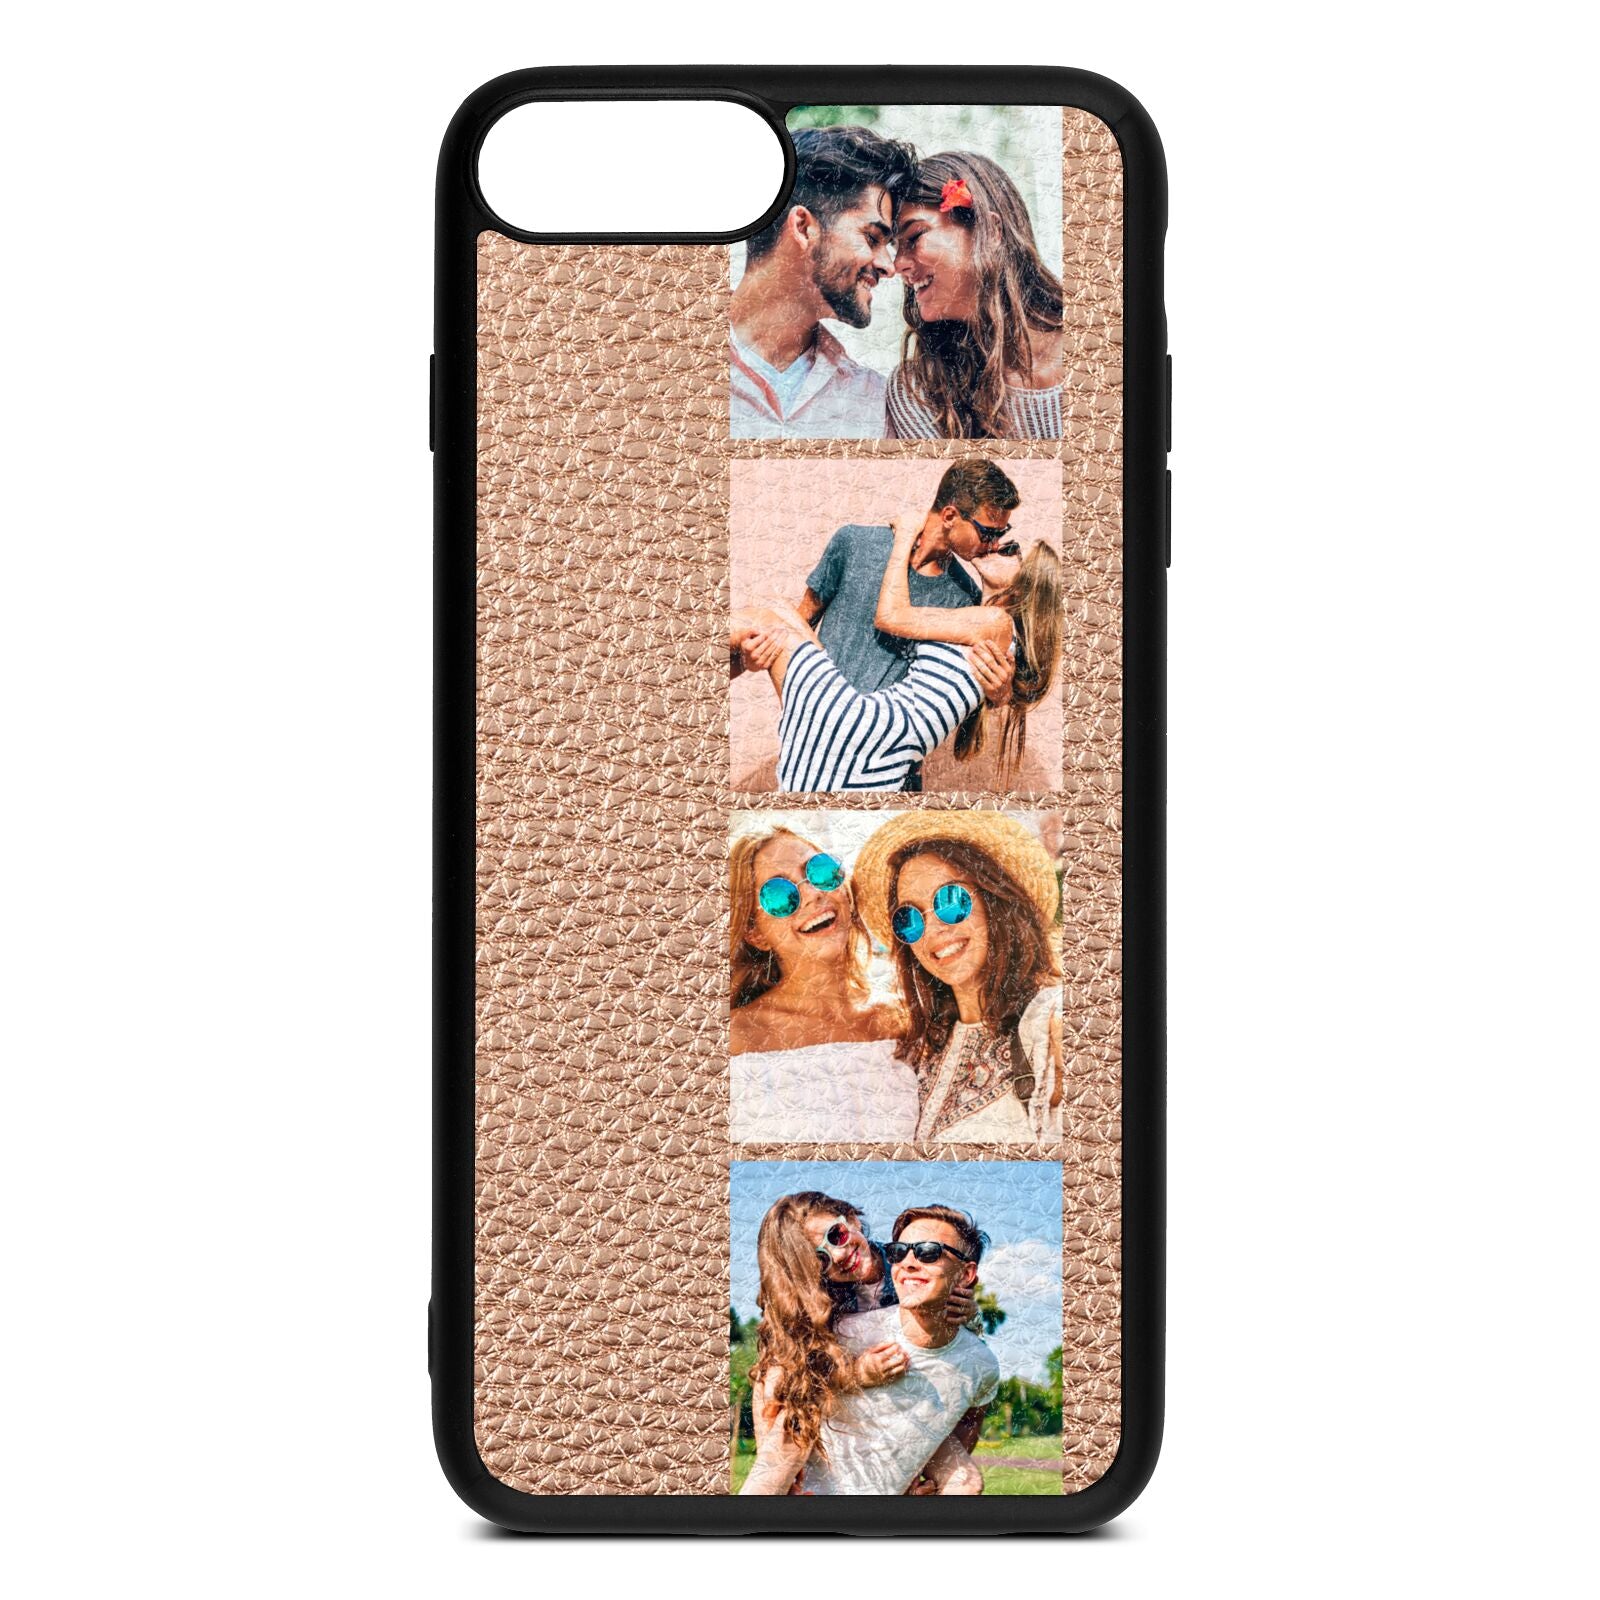 Photo Strip Montage Upload Rose Gold Pebble Leather iPhone 8 Plus Case